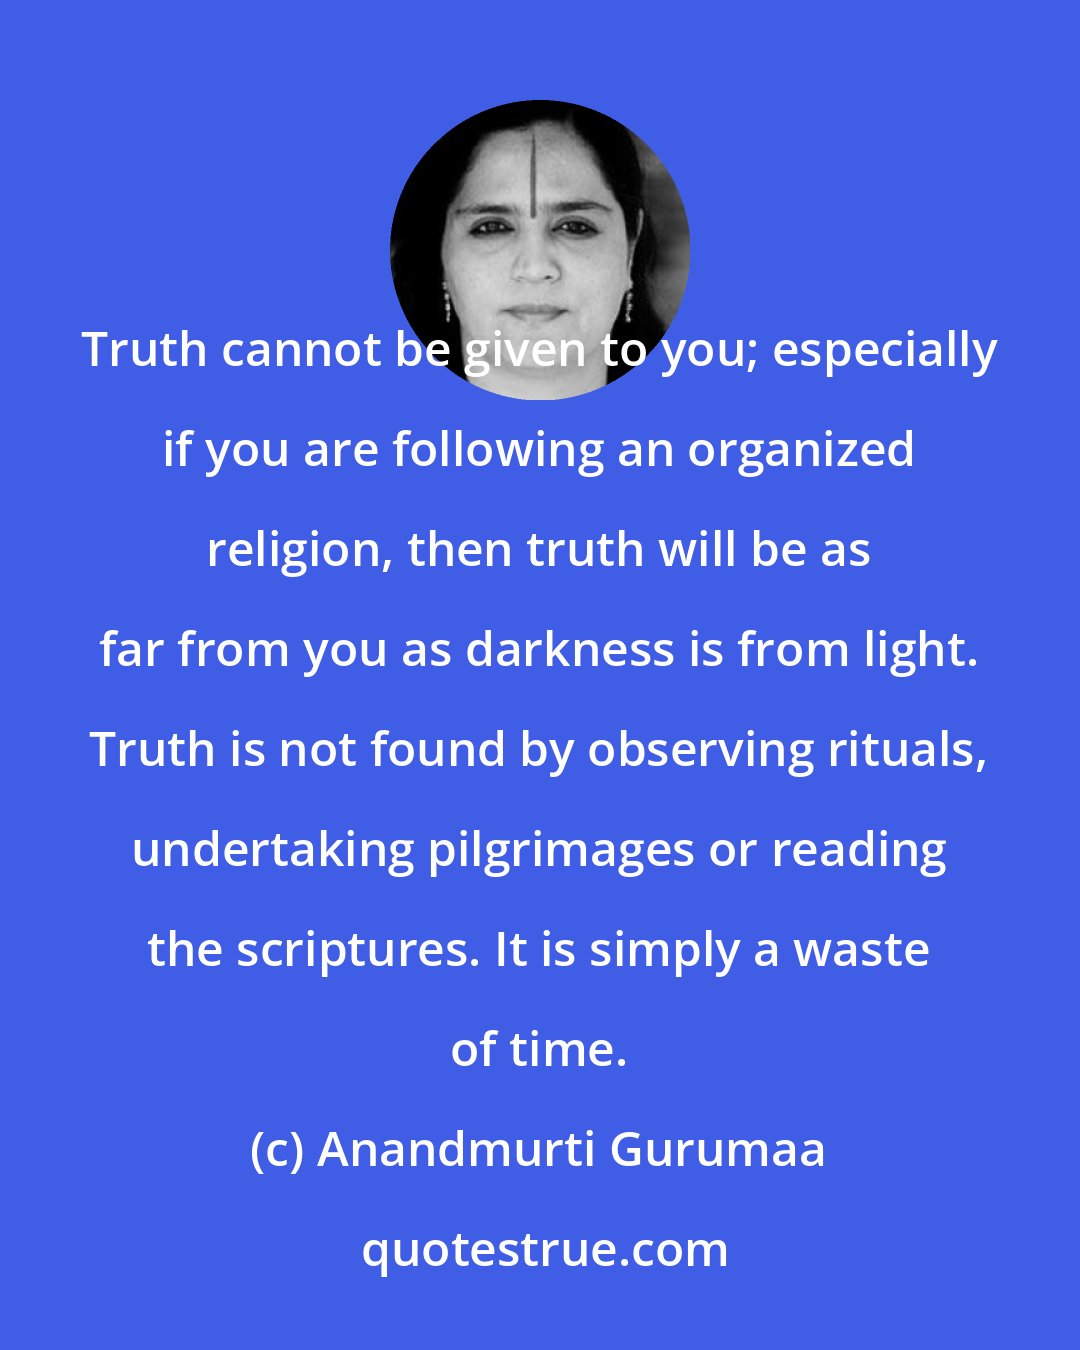 Anandmurti Gurumaa: Truth cannot be given to you; especially if you are following an organized religion, then truth will be as far from you as darkness is from light. Truth is not found by observing rituals, undertaking pilgrimages or reading the scriptures. It is simply a waste of time.